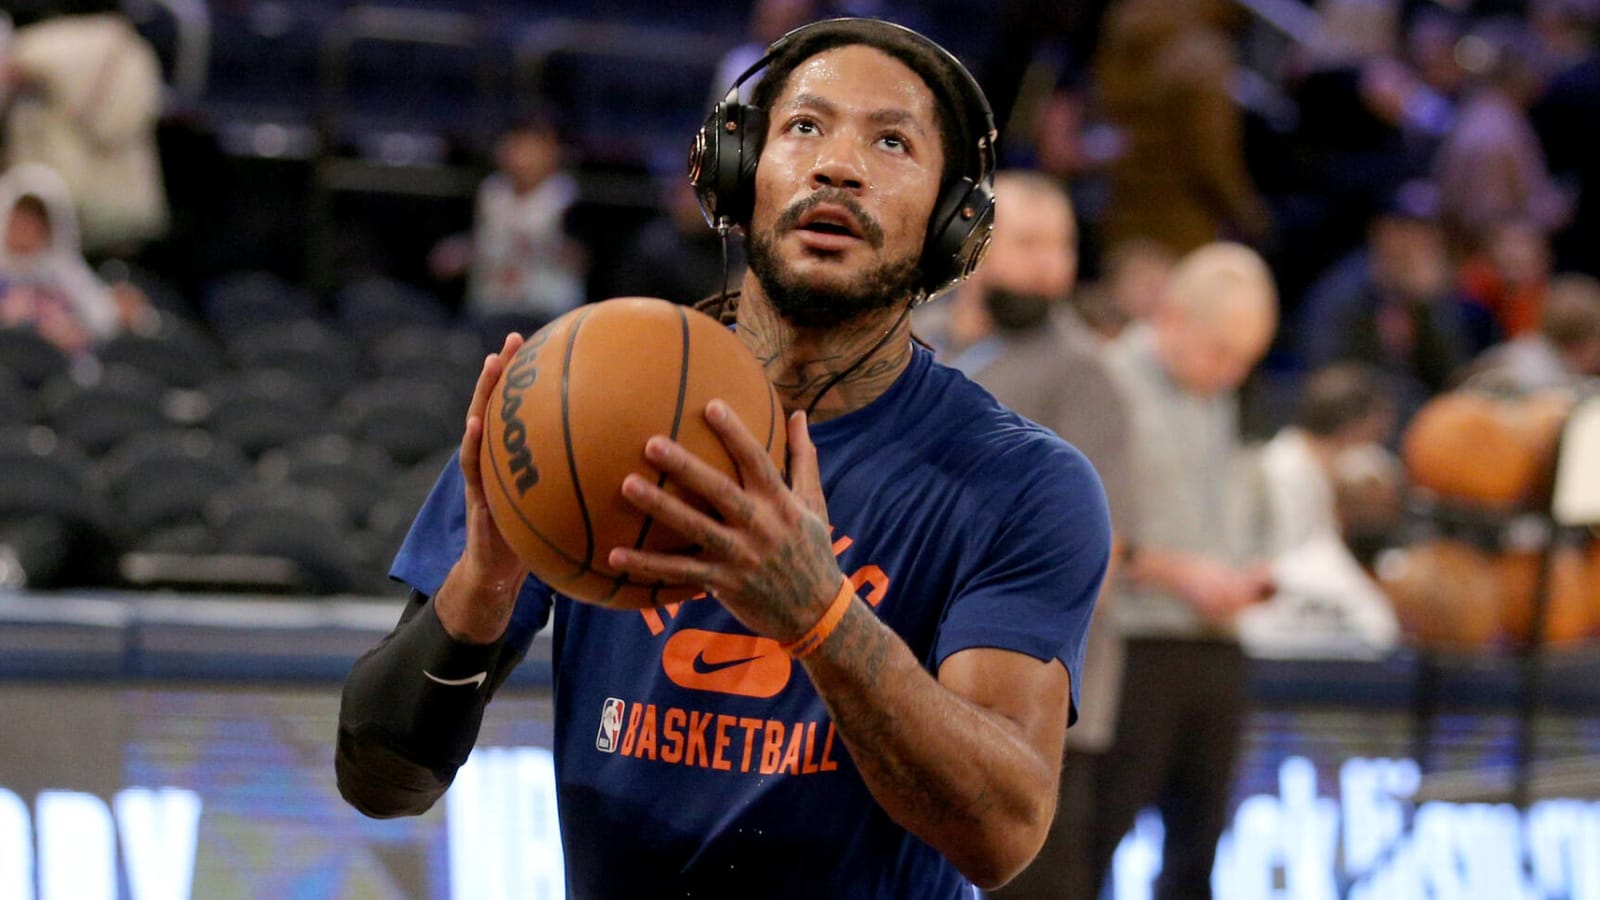 Derrick Rose reveals he is at his rookie weight